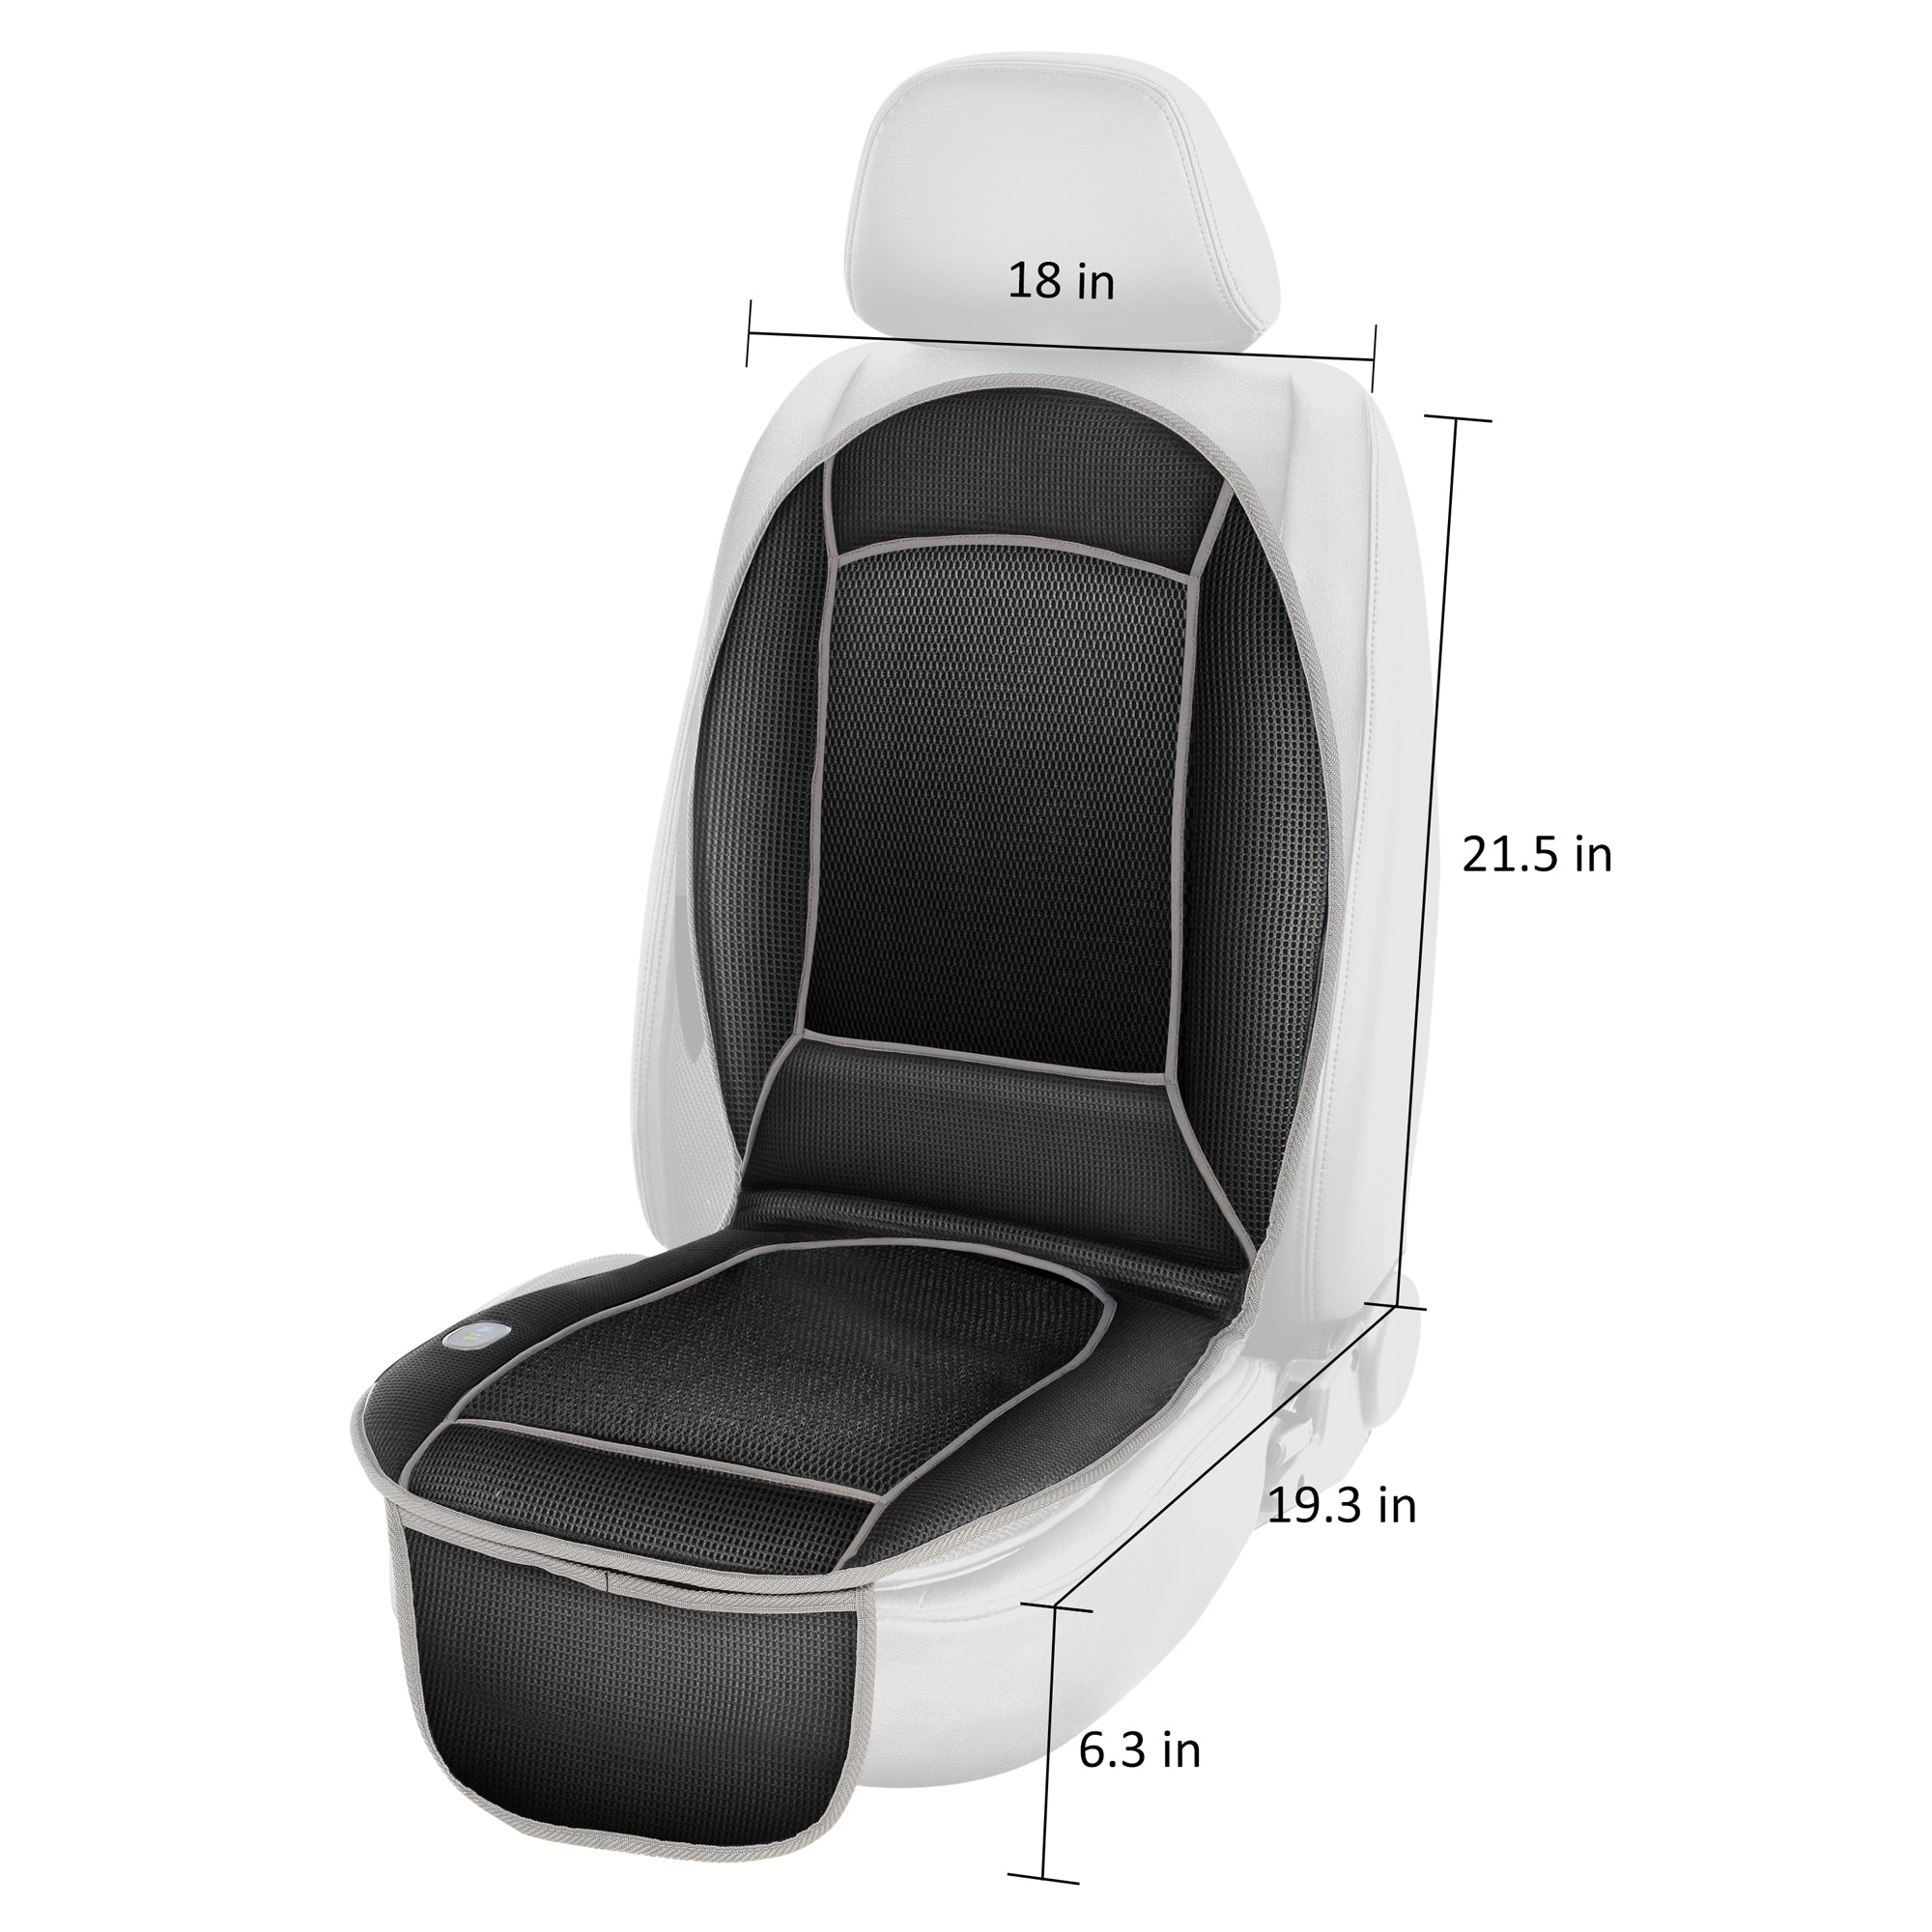 Waterproof Durable Back Support Protect Front Seat Cover Interior  Accessories Massage Cushion Car Seat Cushion Van Seat Car Accessories